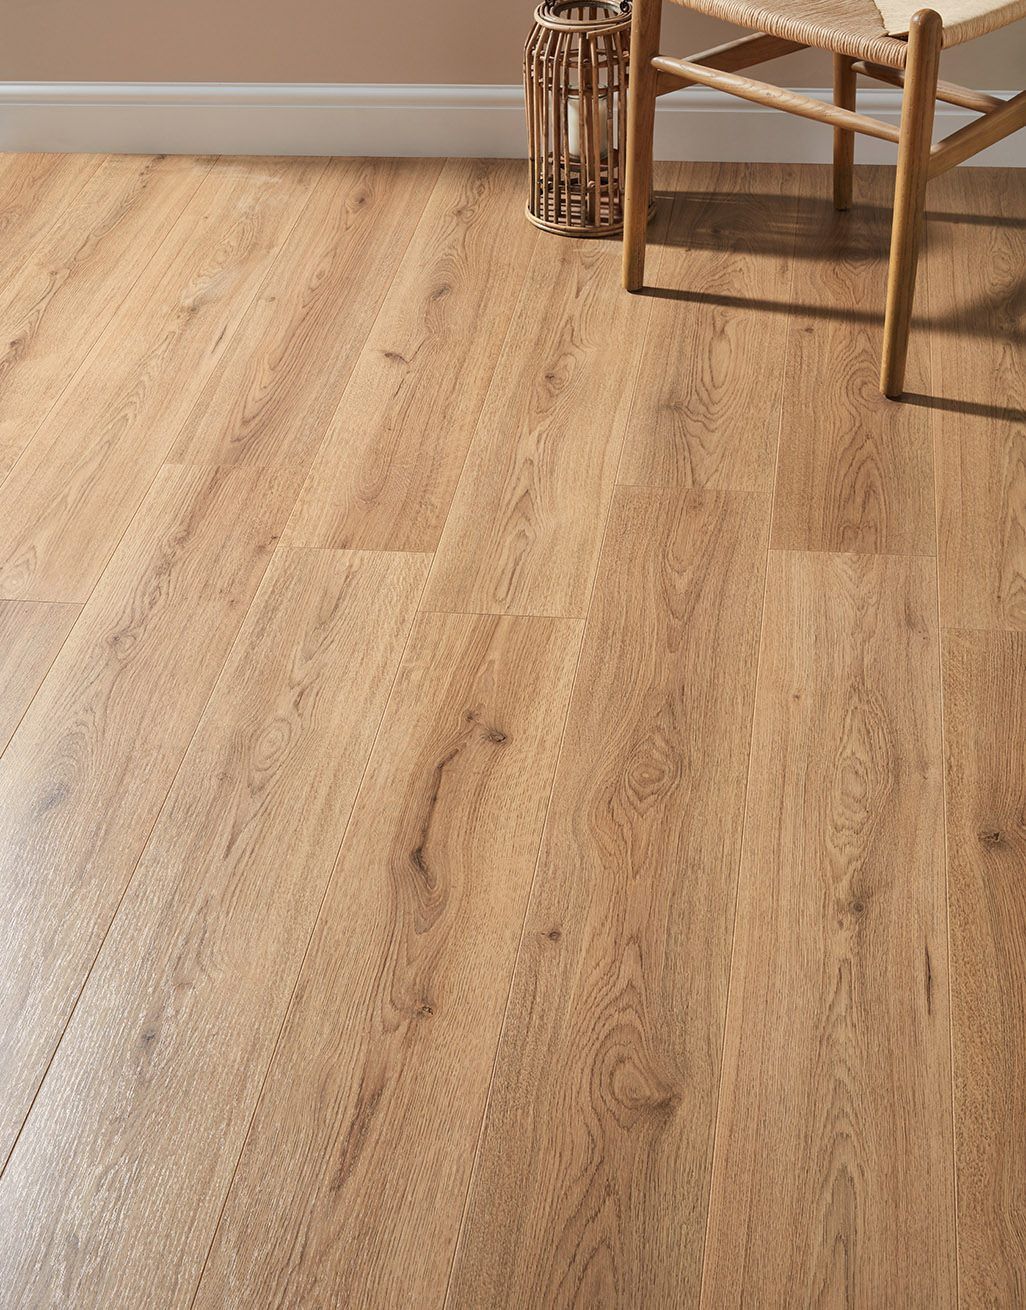 Laminate flooring reviews: tips, pros and
cons